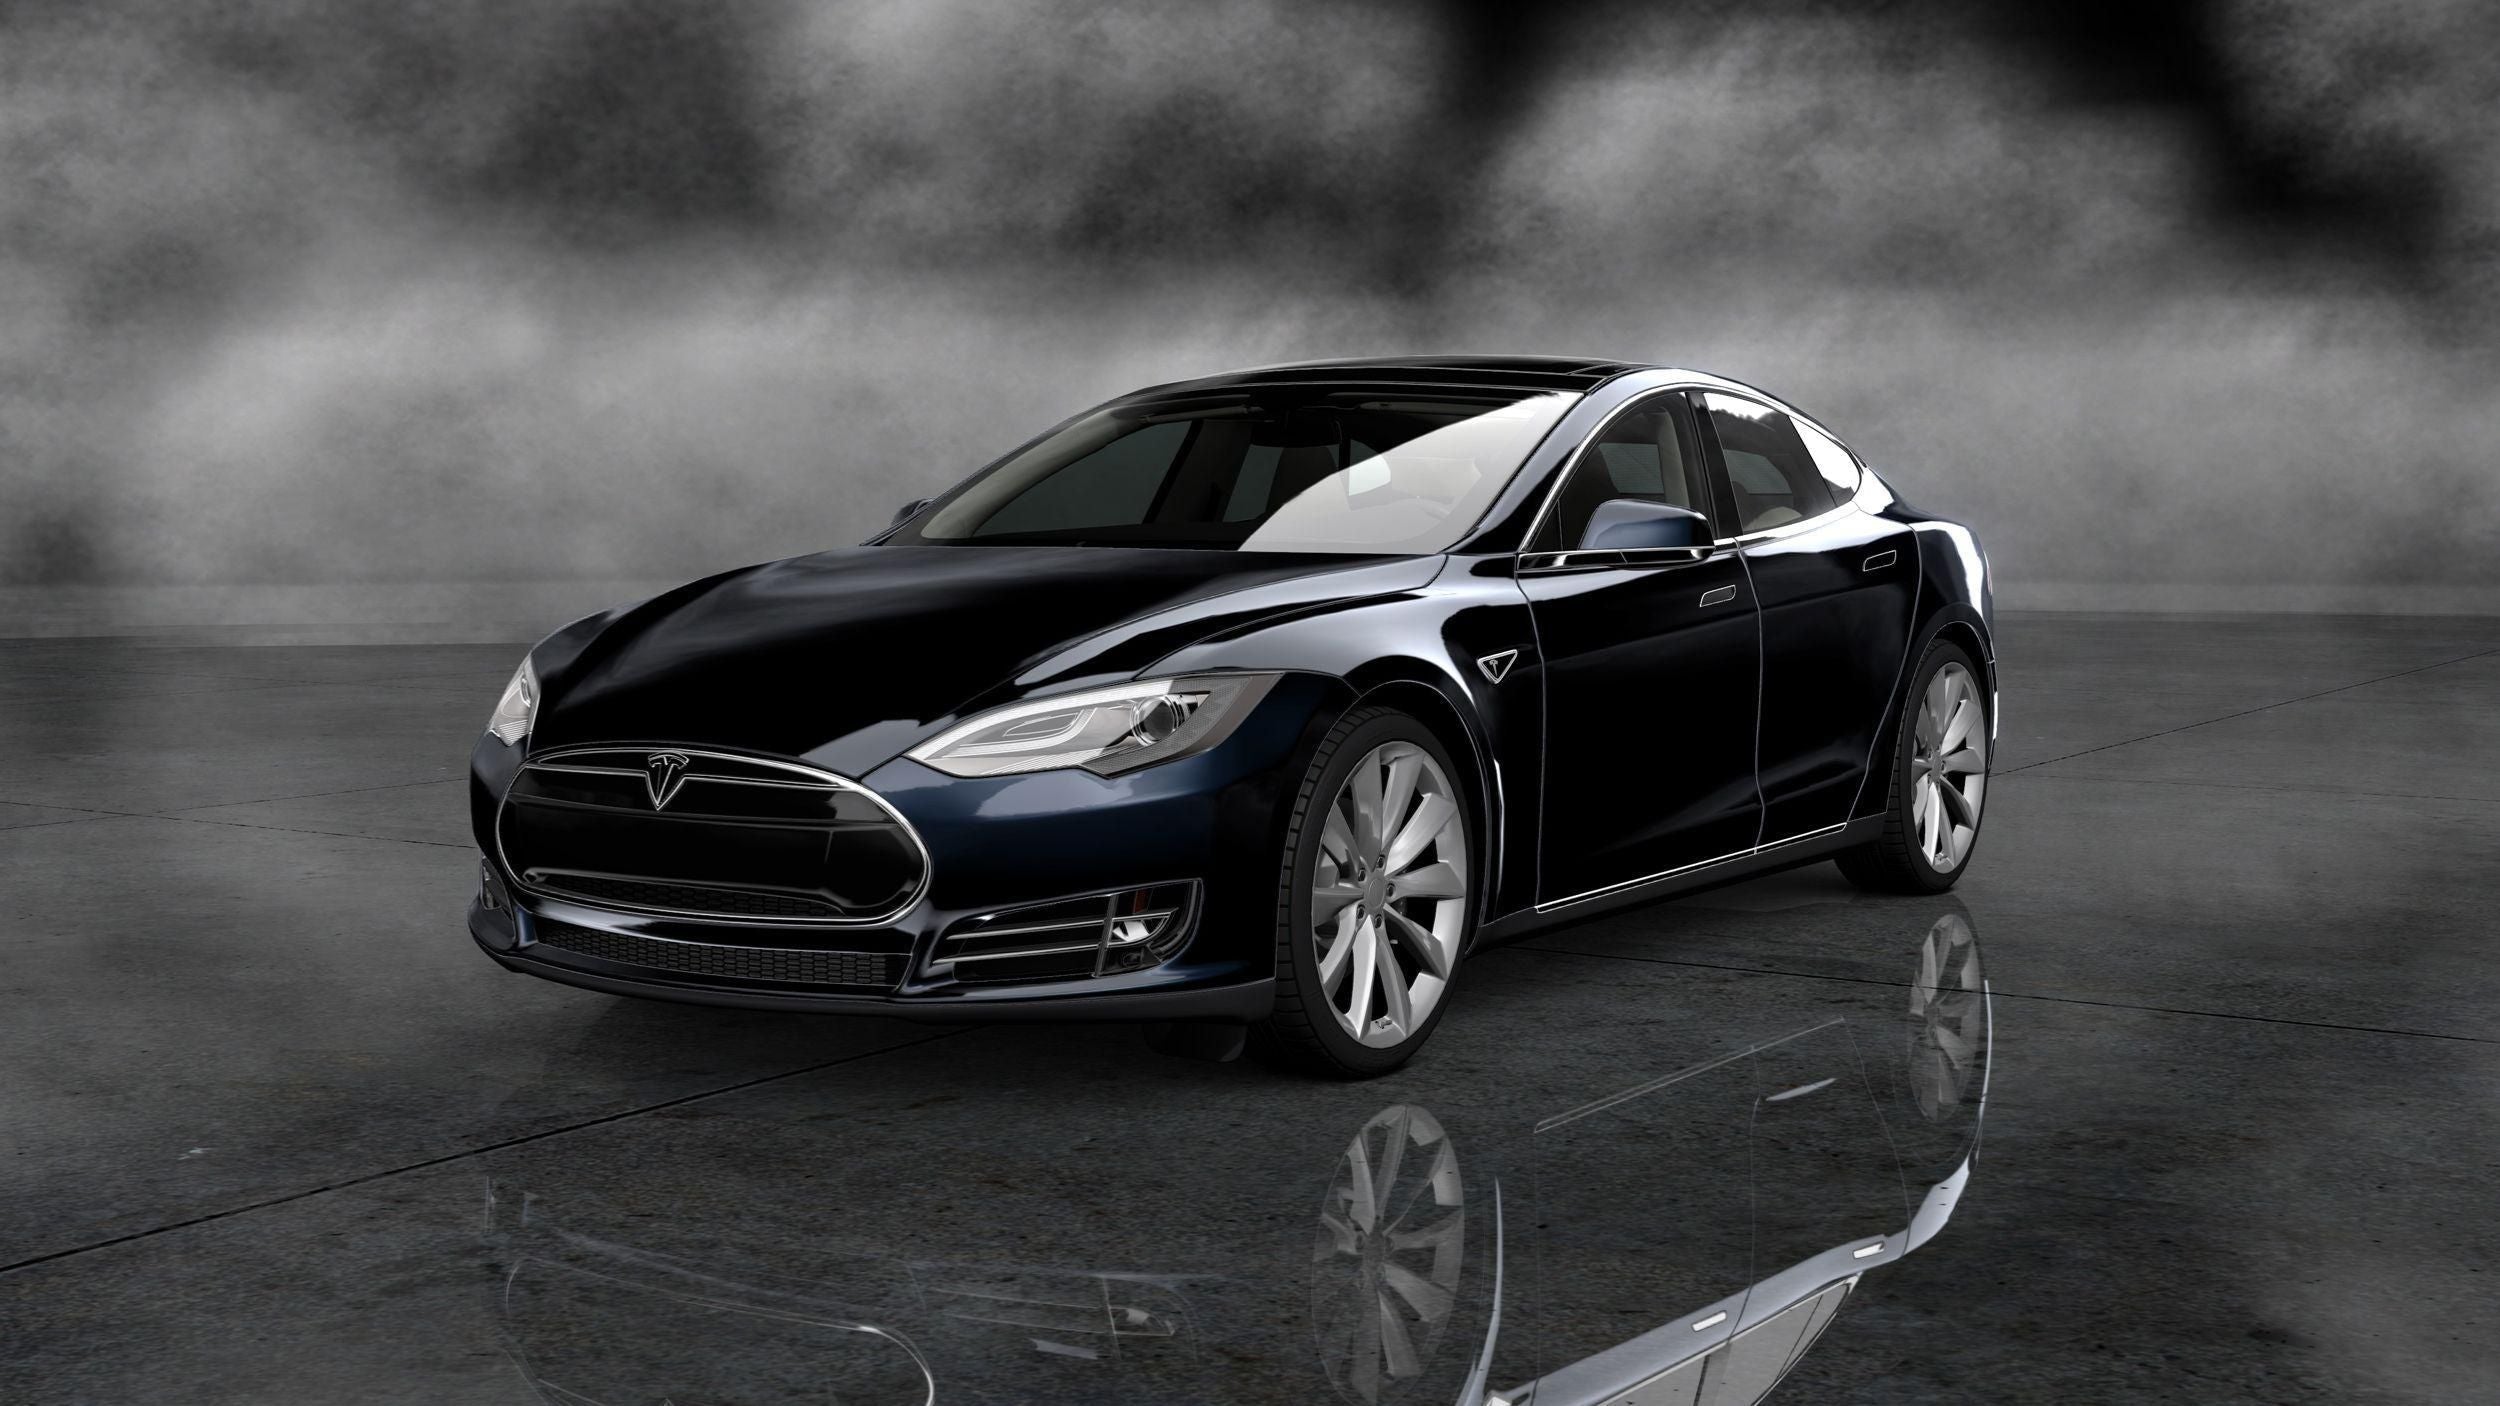 Mobile tire service banner showing a black Tesla Model S on a gray background.